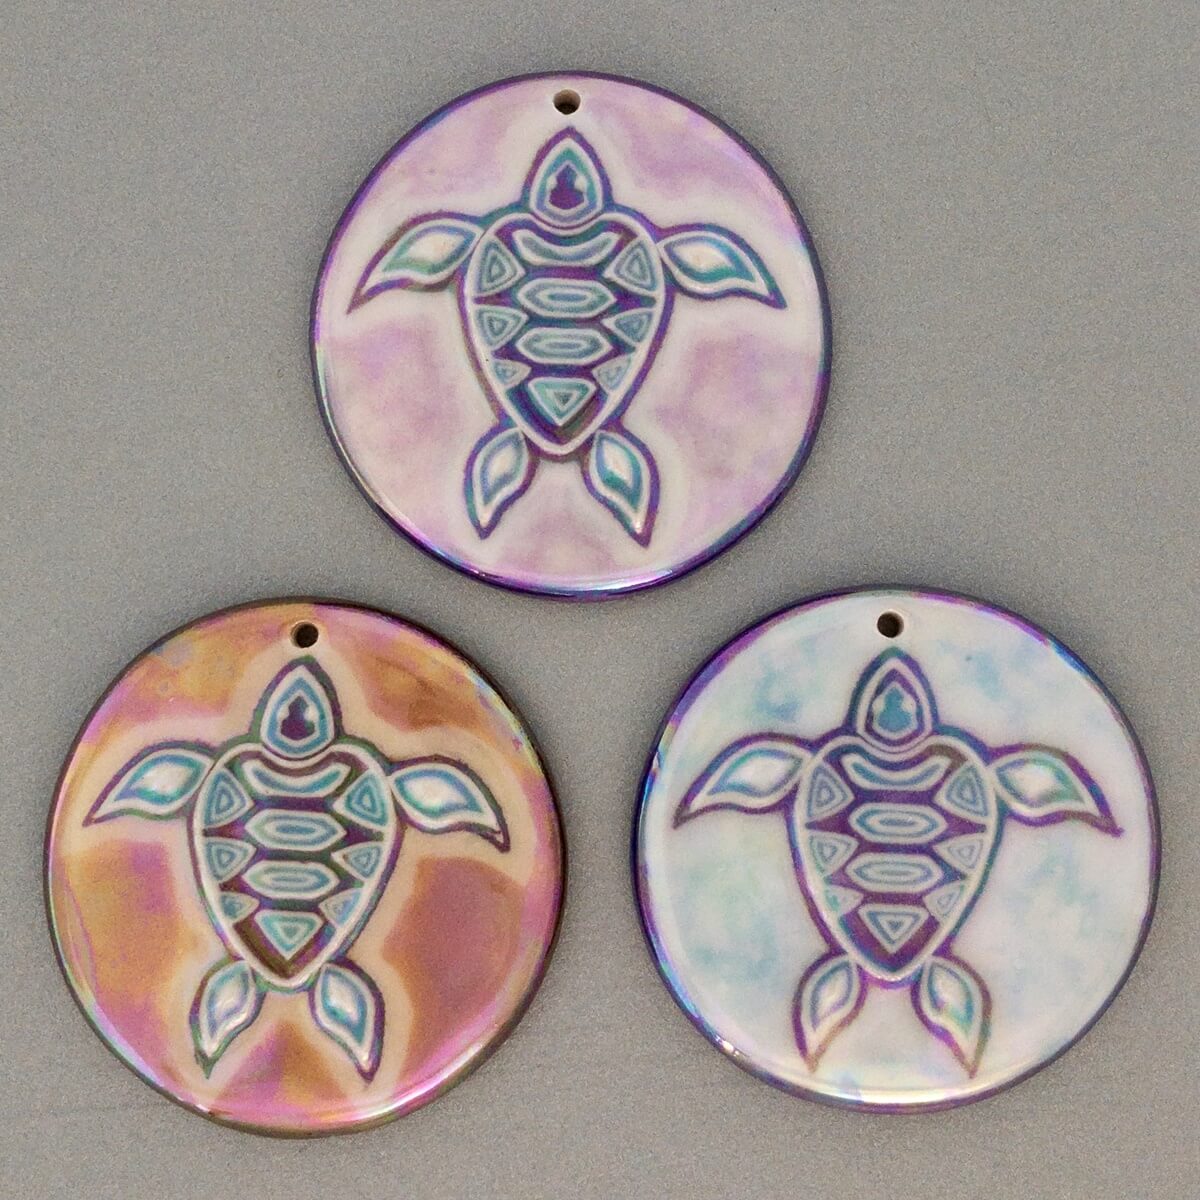 Our new tribal turtle in 3 different colorways.